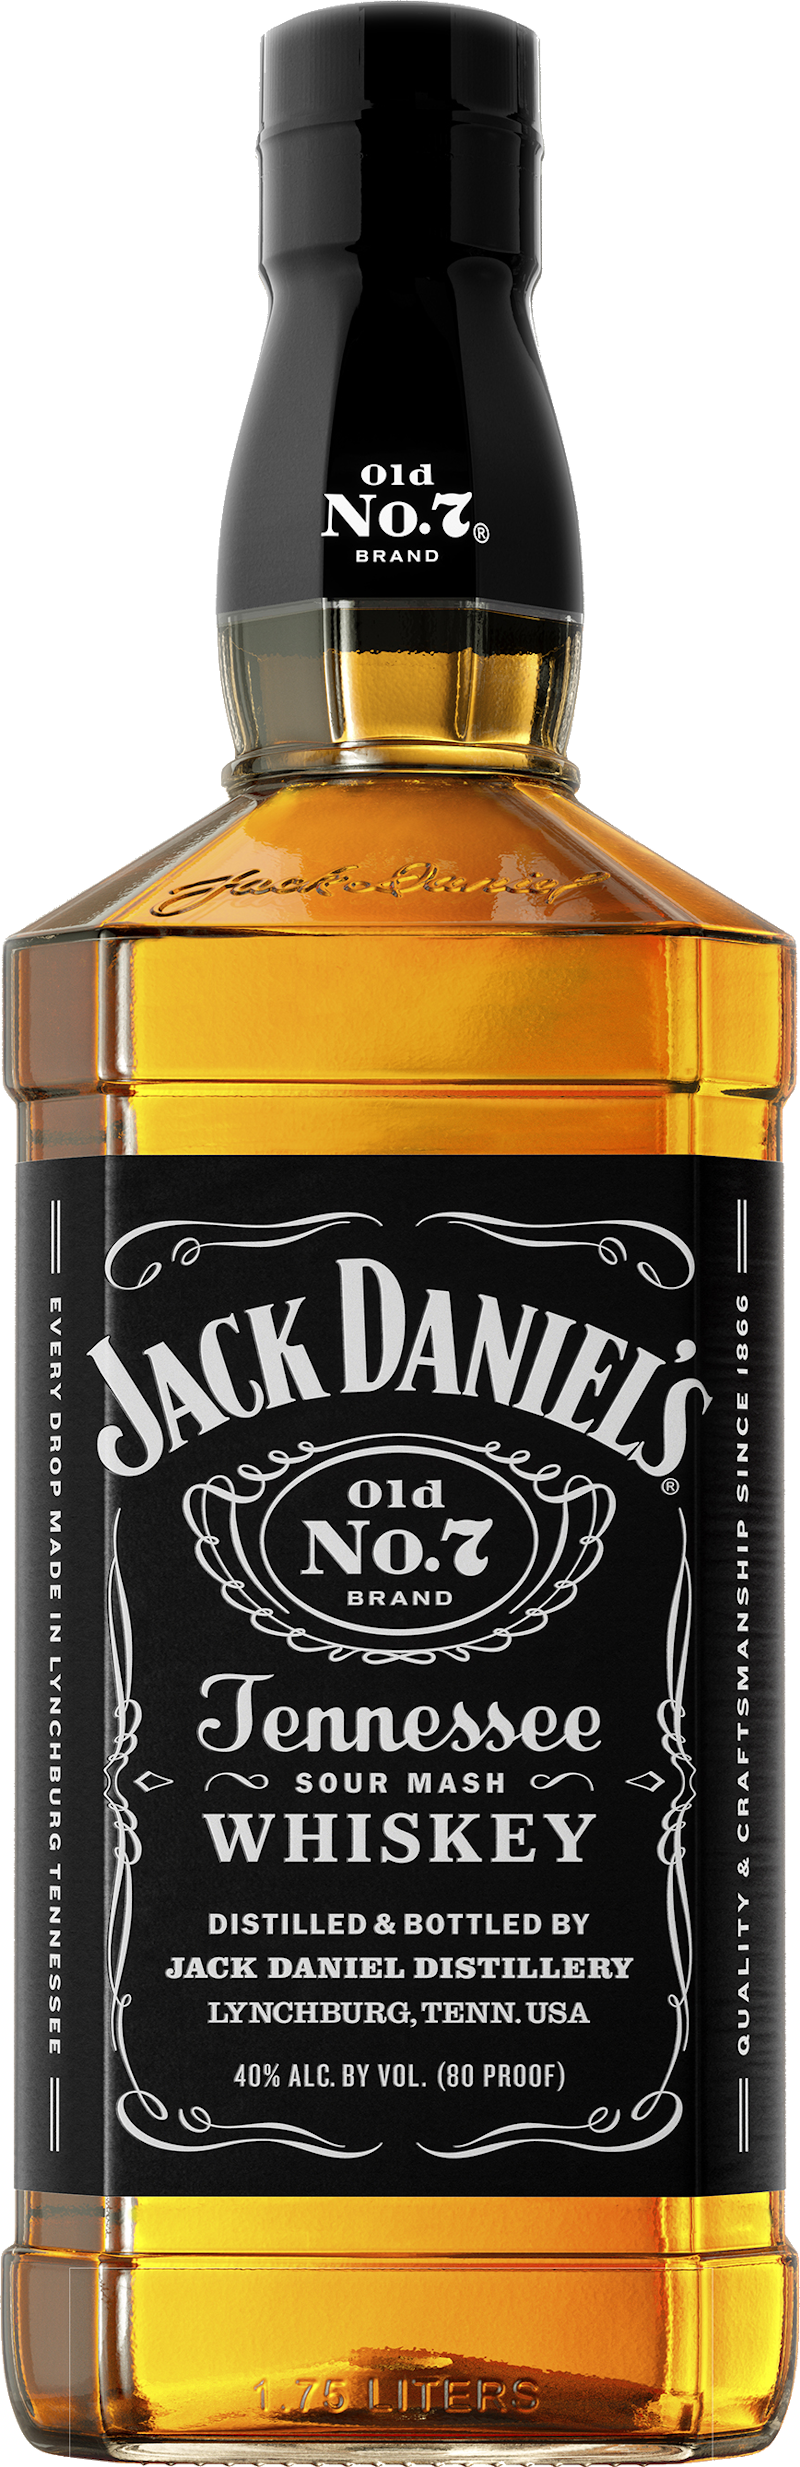 Jack Daniel's Tennessee Whiskey 1.75